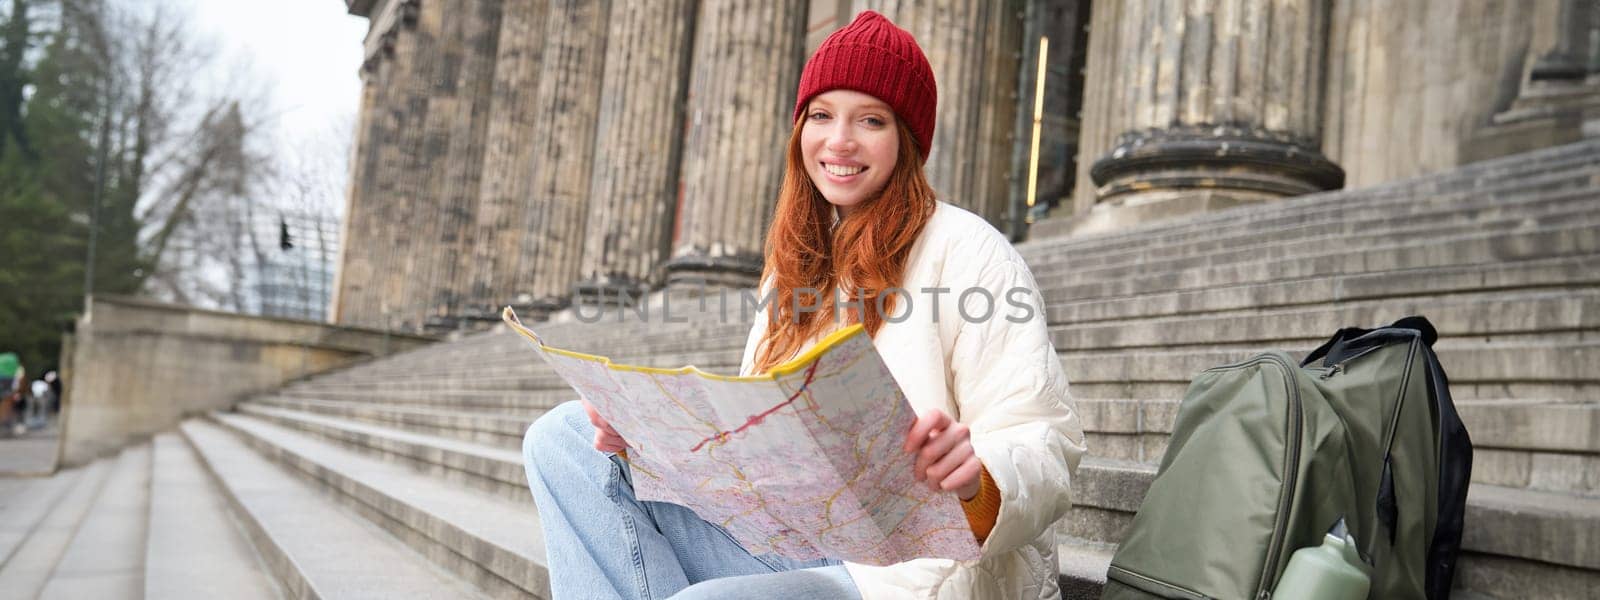 Tourism and lifestyle concept. Young redhead woman looking at city map, plans a route for sightseeing day, sits outdoors on stairs and rests.